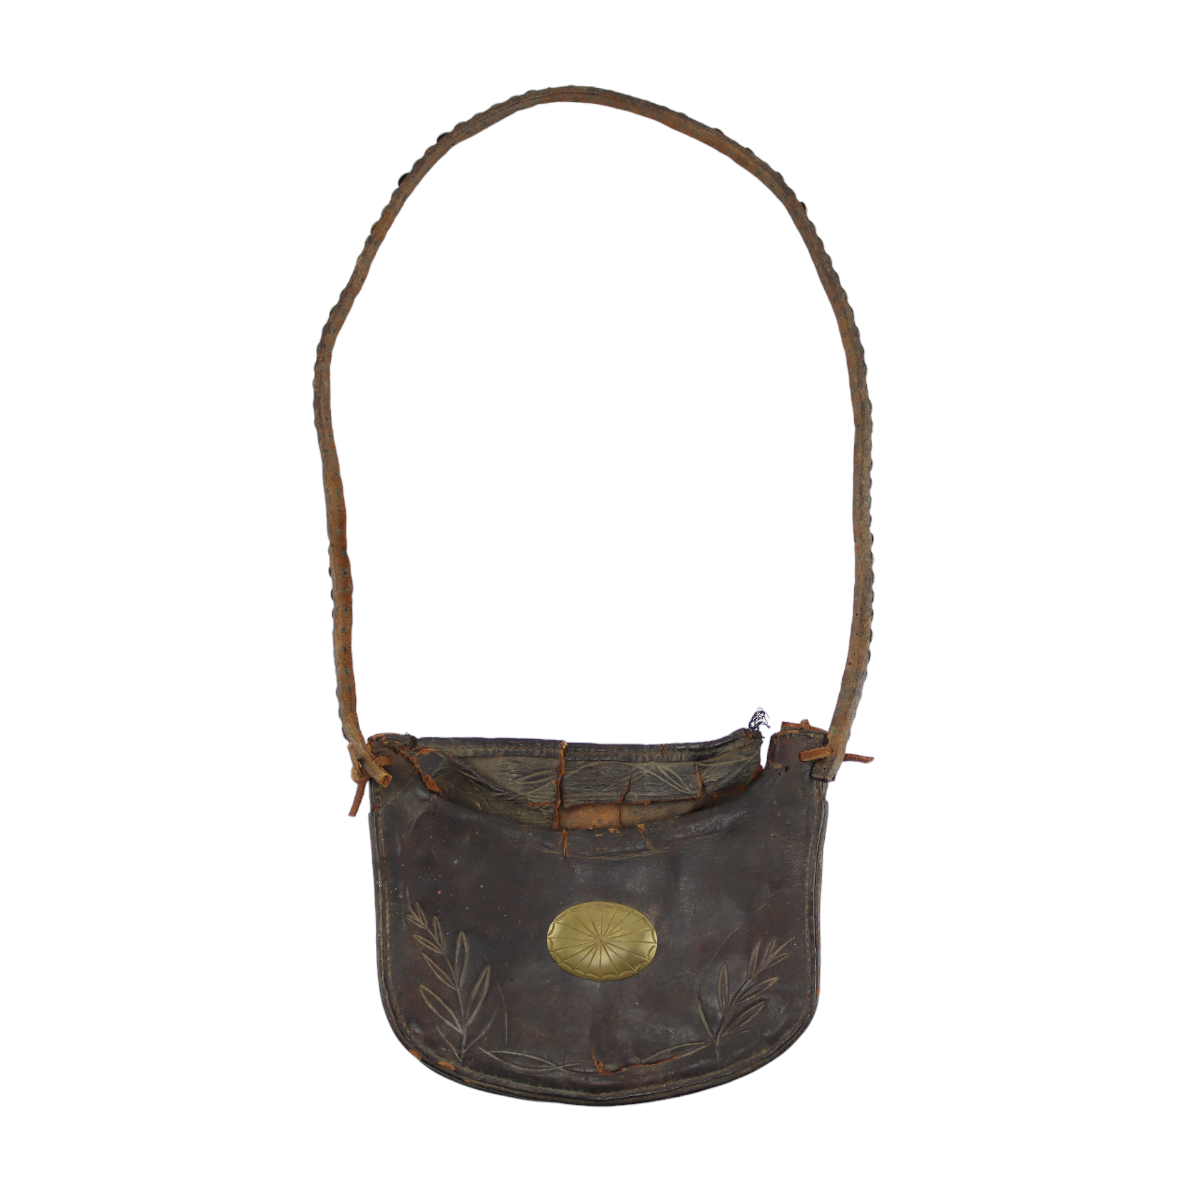 Ute Leather Bag with Concho c. 1890s, 6.25" x 7.75" (M90105-0623-007)